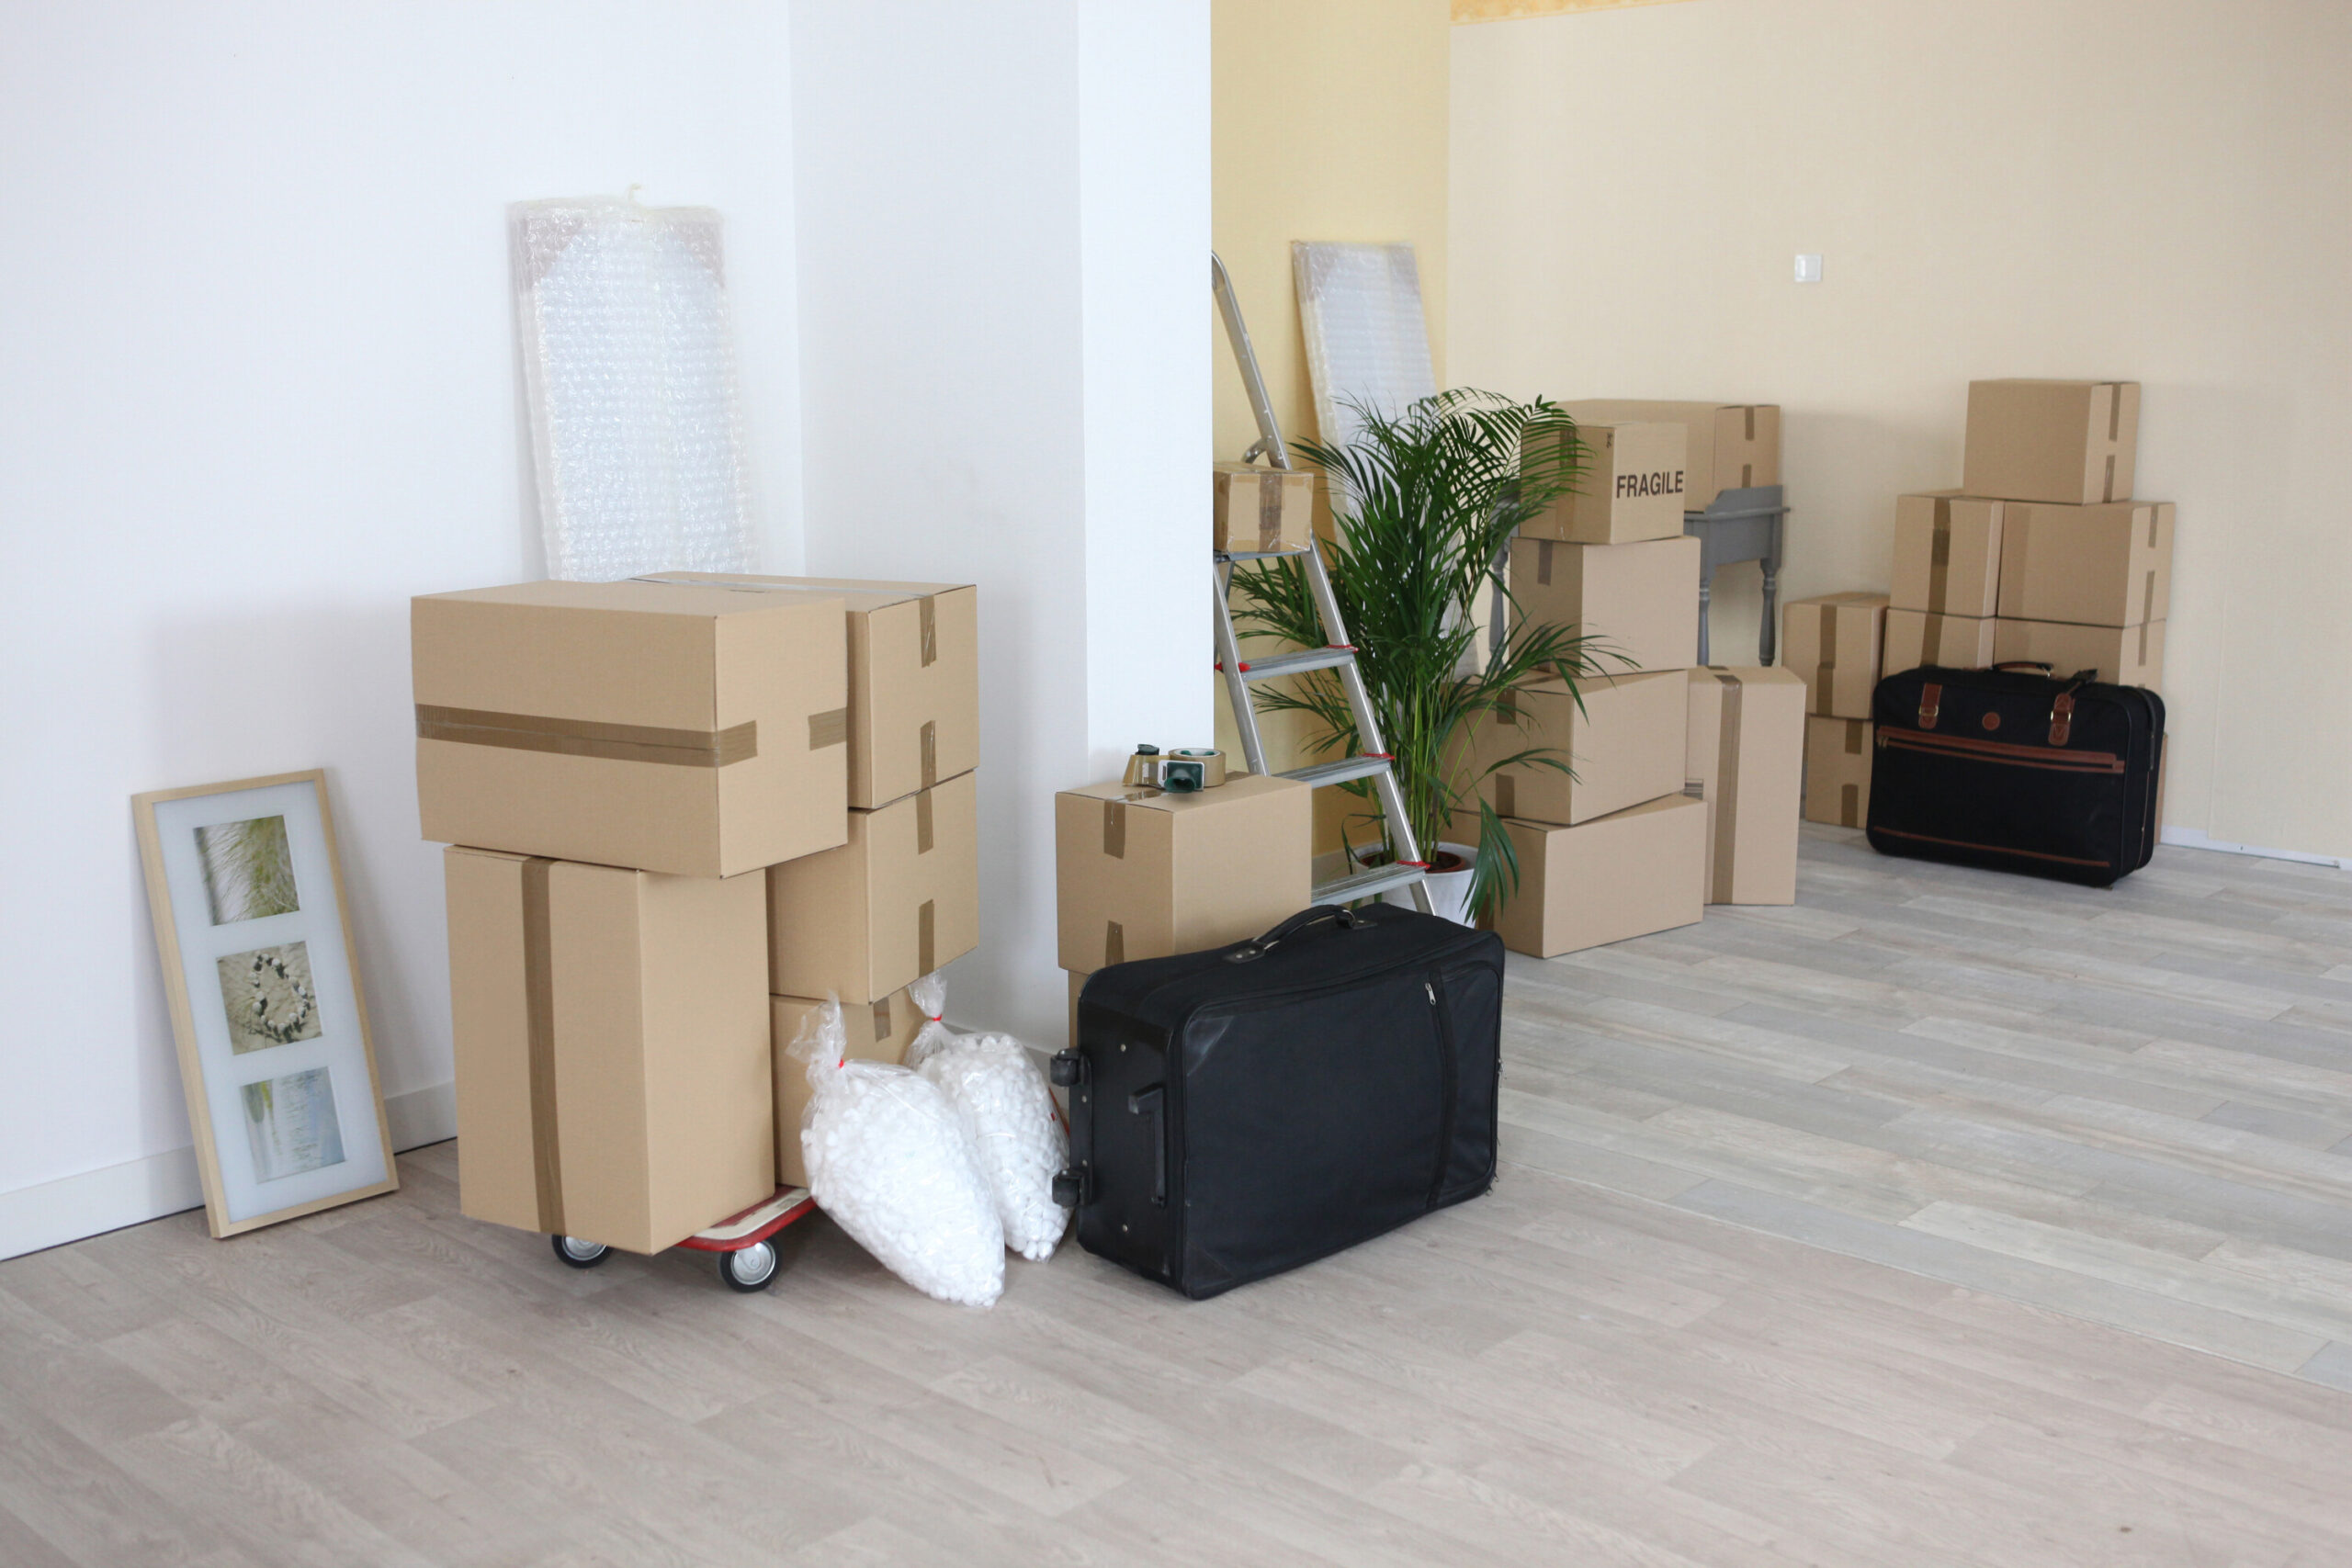 Two rooms of a home with moving boxes stacked up.